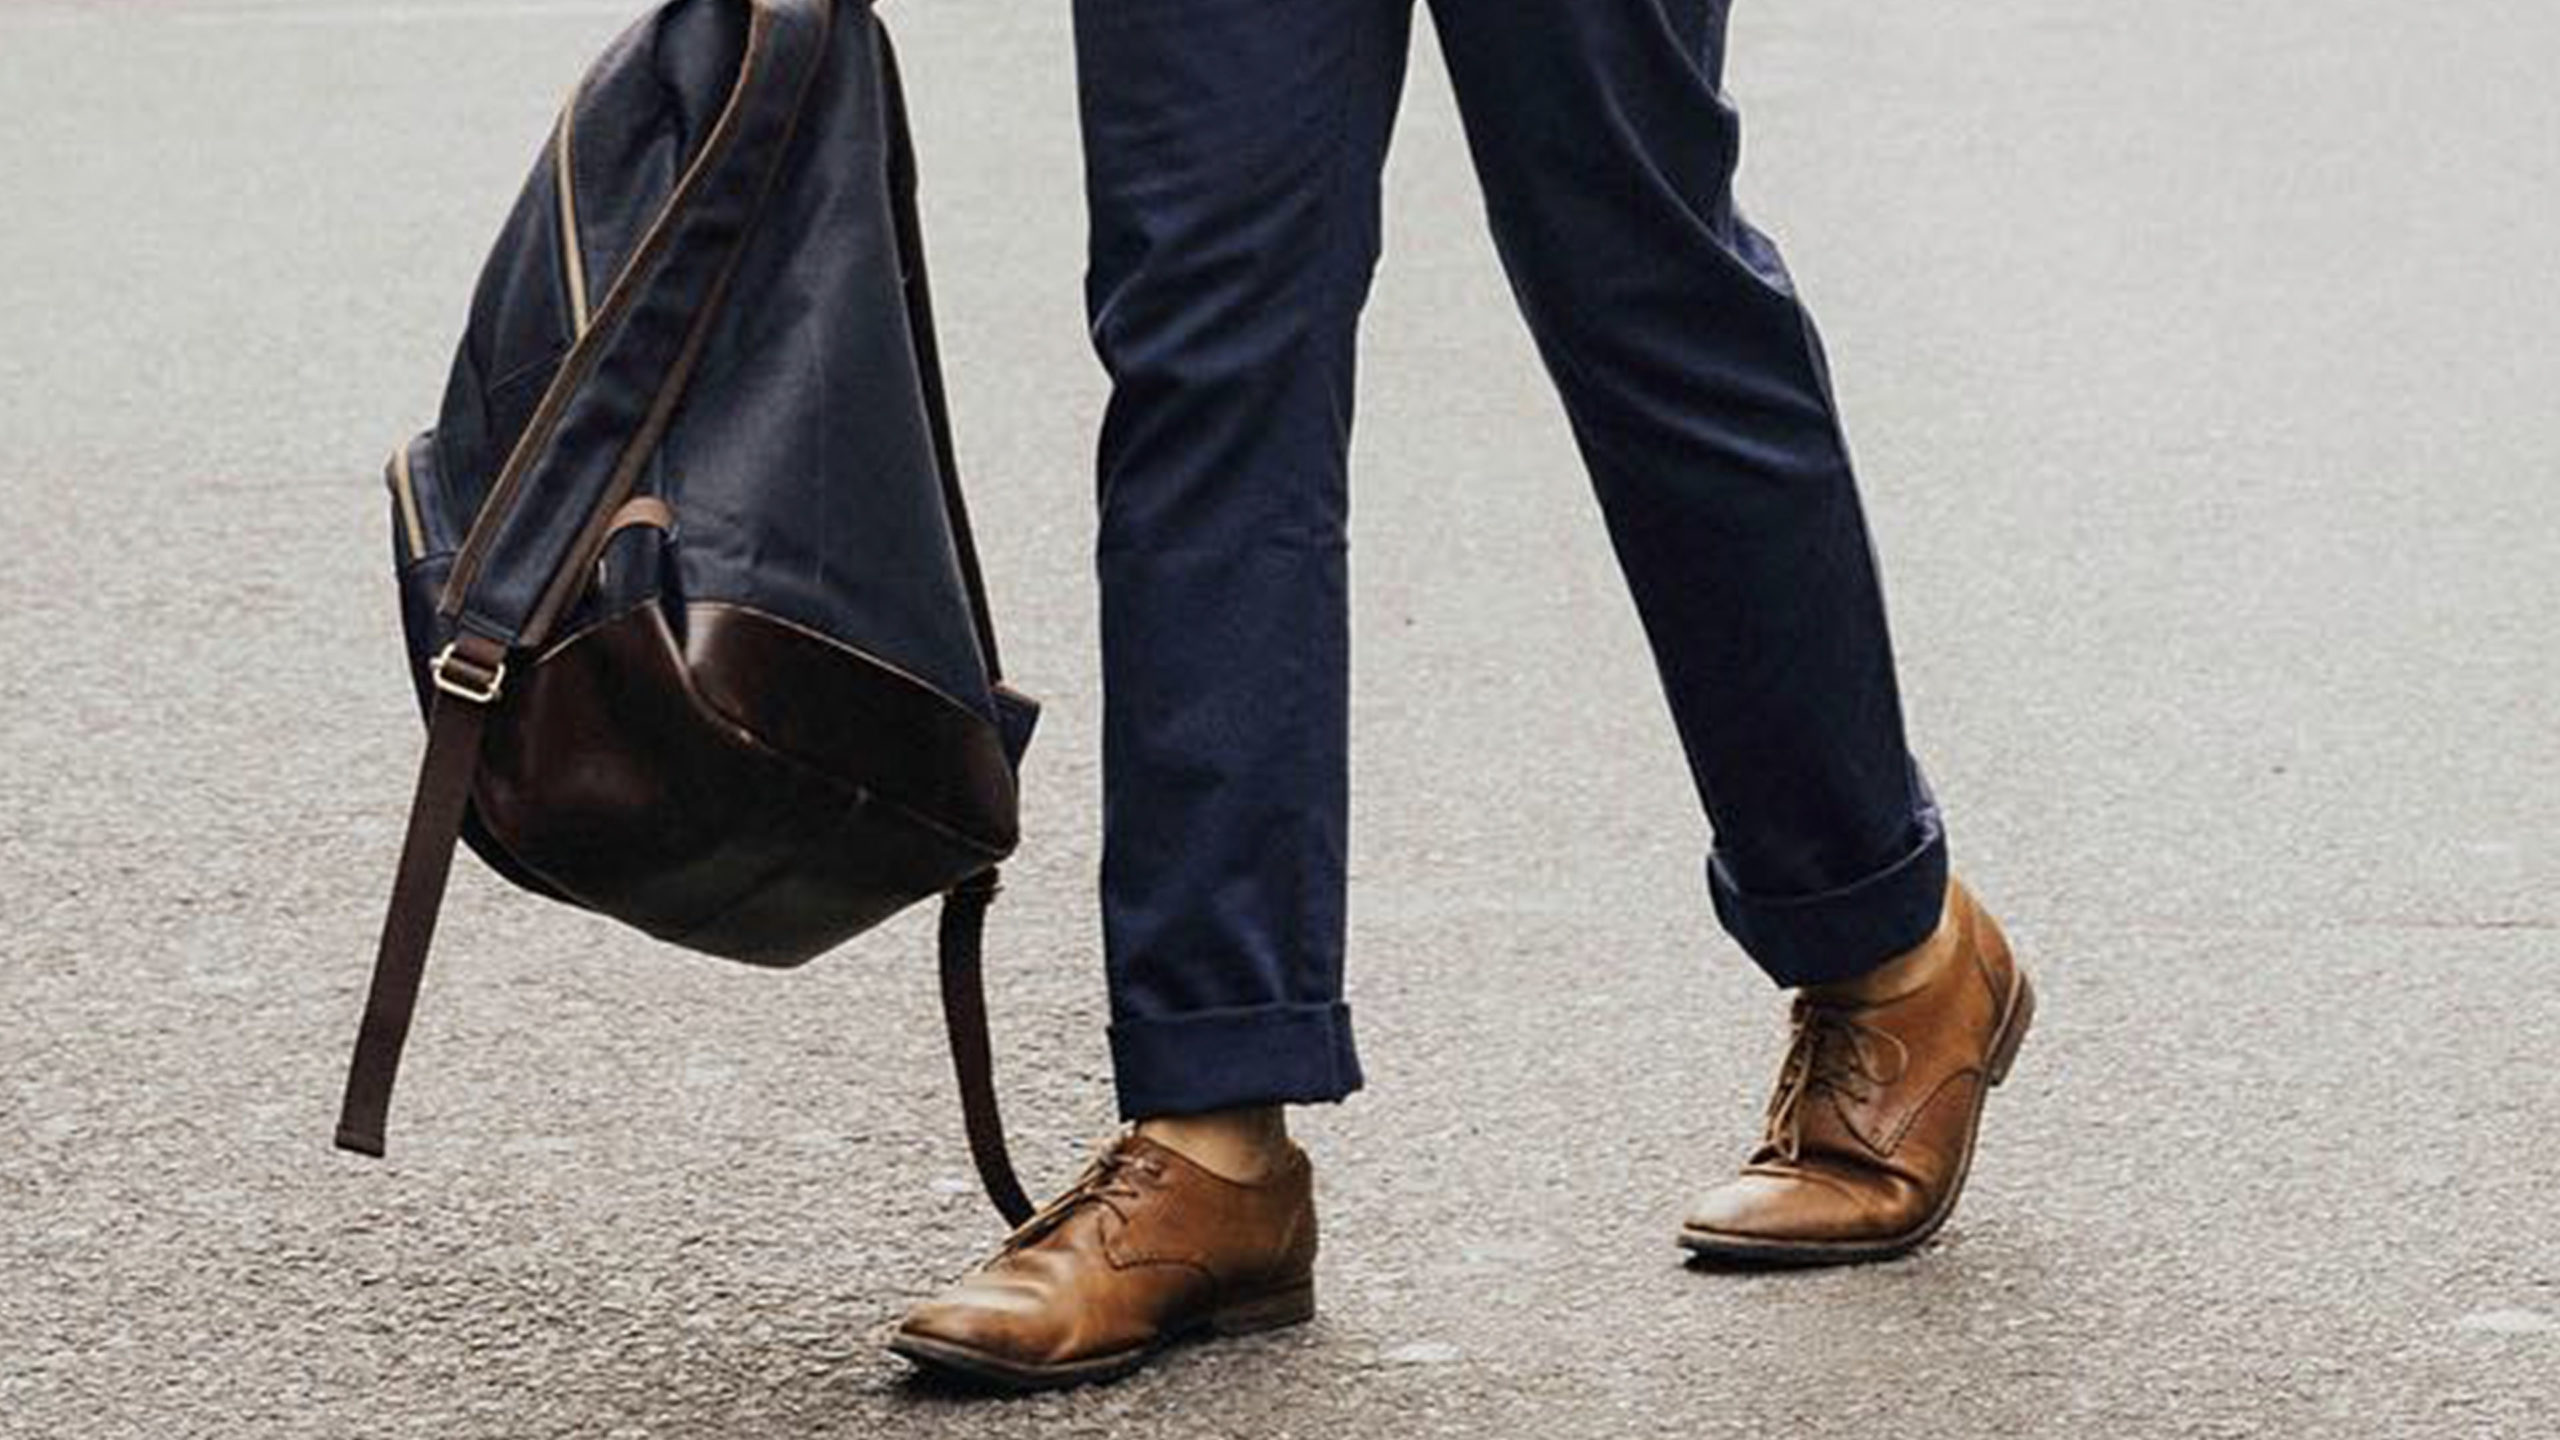 CHINOS: HOW TO WEAR THEM WELL